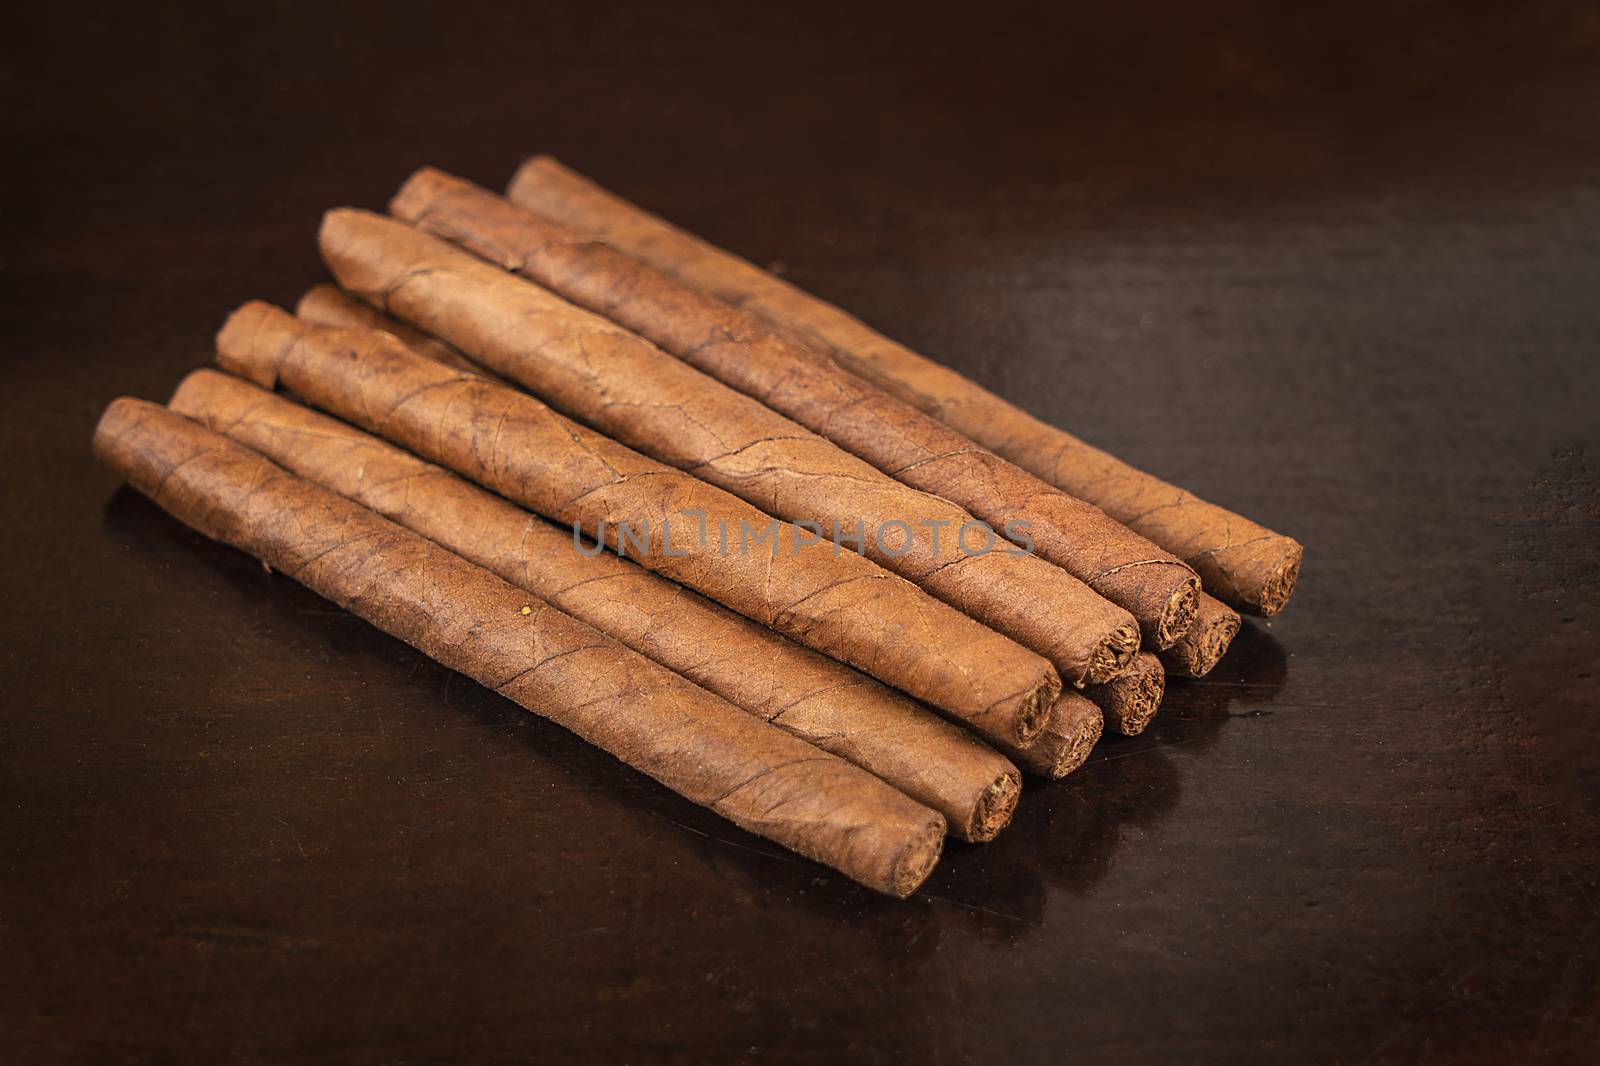 A group of nine small cigars on a table